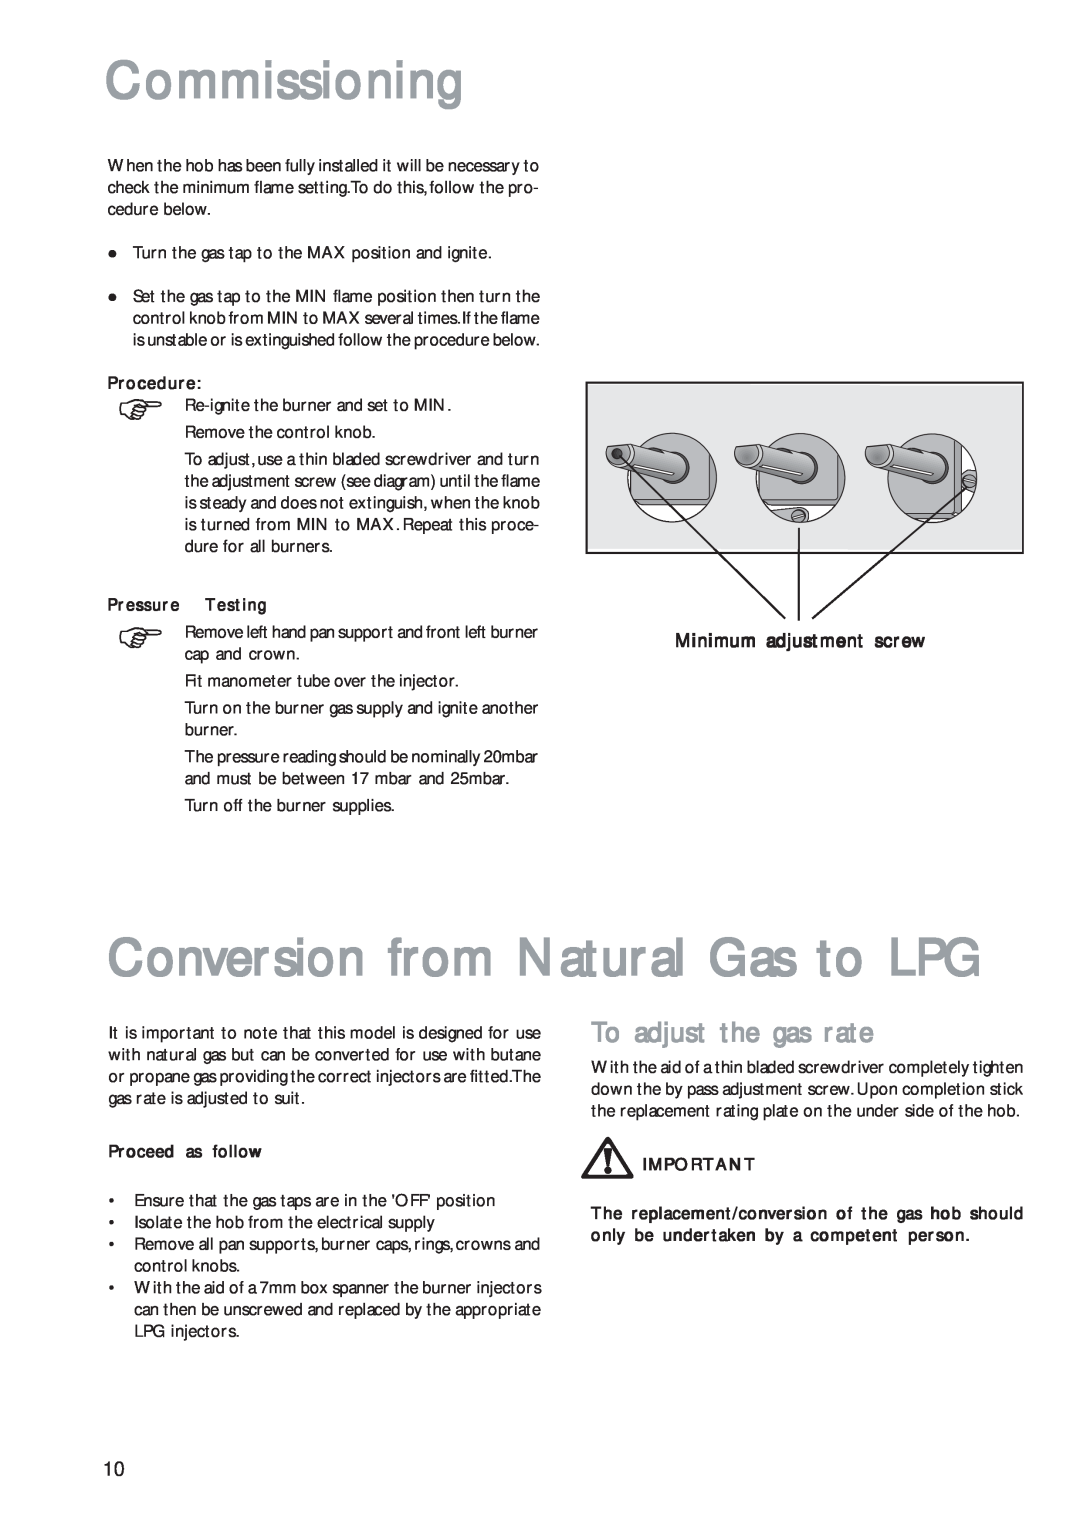 John Lewis JLBIGH601 Commissioning, Conversion from Natural Gas to LPG, To adjust the gas rate, Procedure 